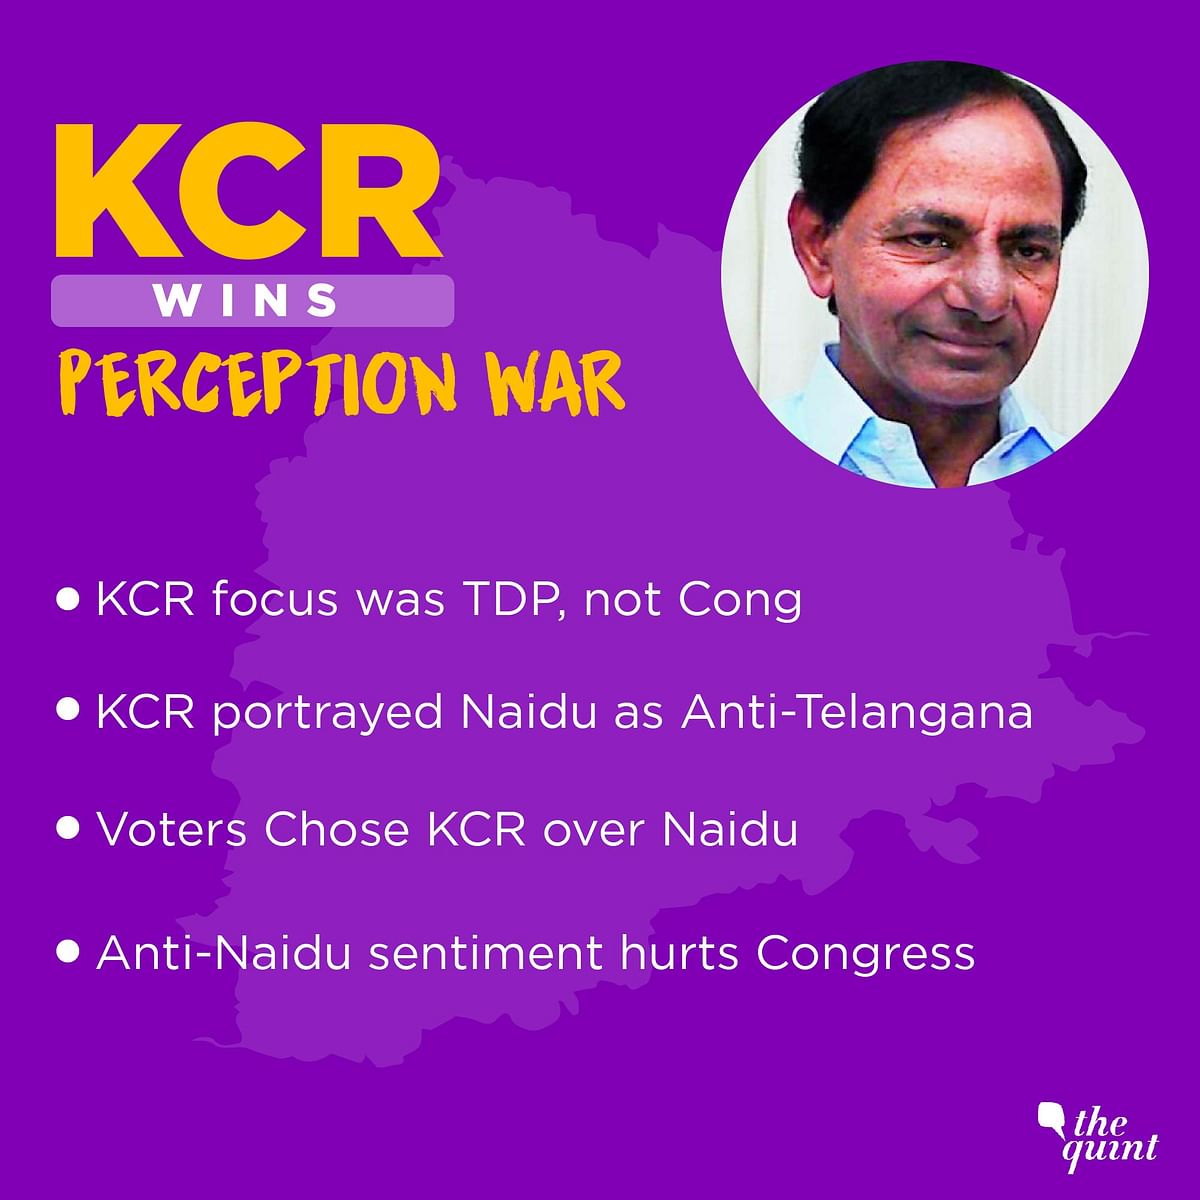 Perception management, Congress’ cardinal mistakes and an overriding Telangana feeling gave KCR a landslide victory.